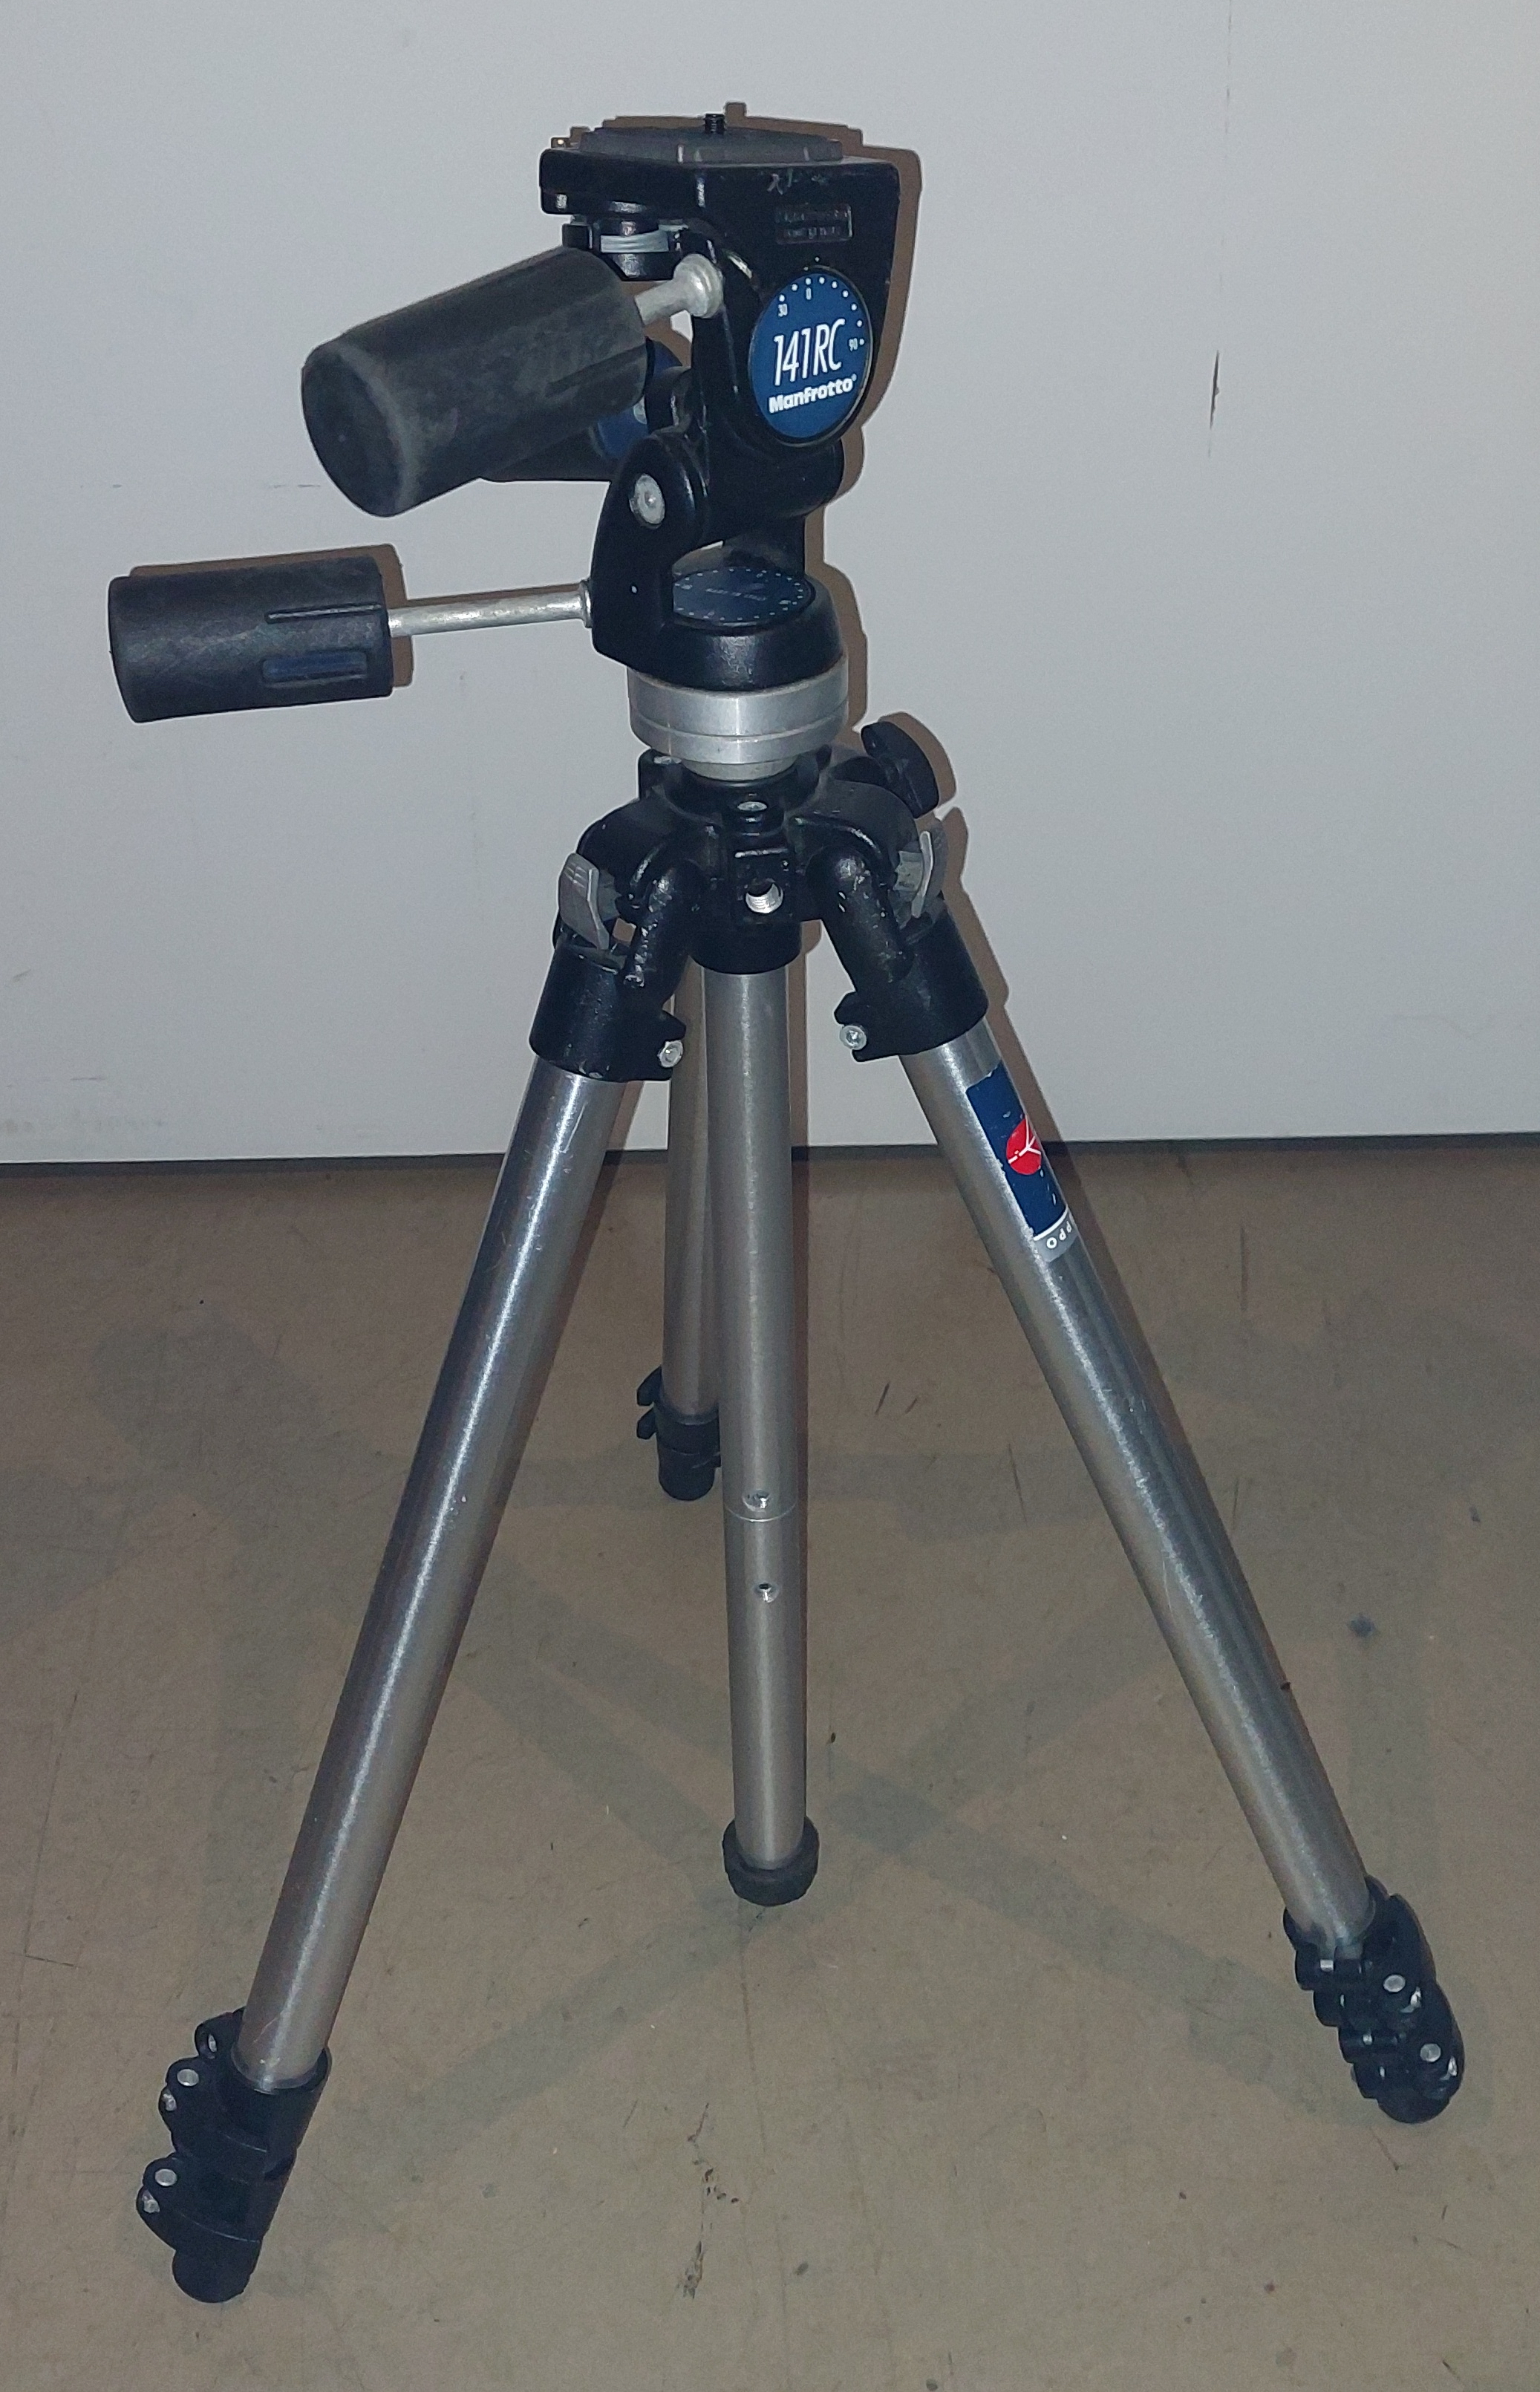 Manfrotto 141RC Photography Tripod #1